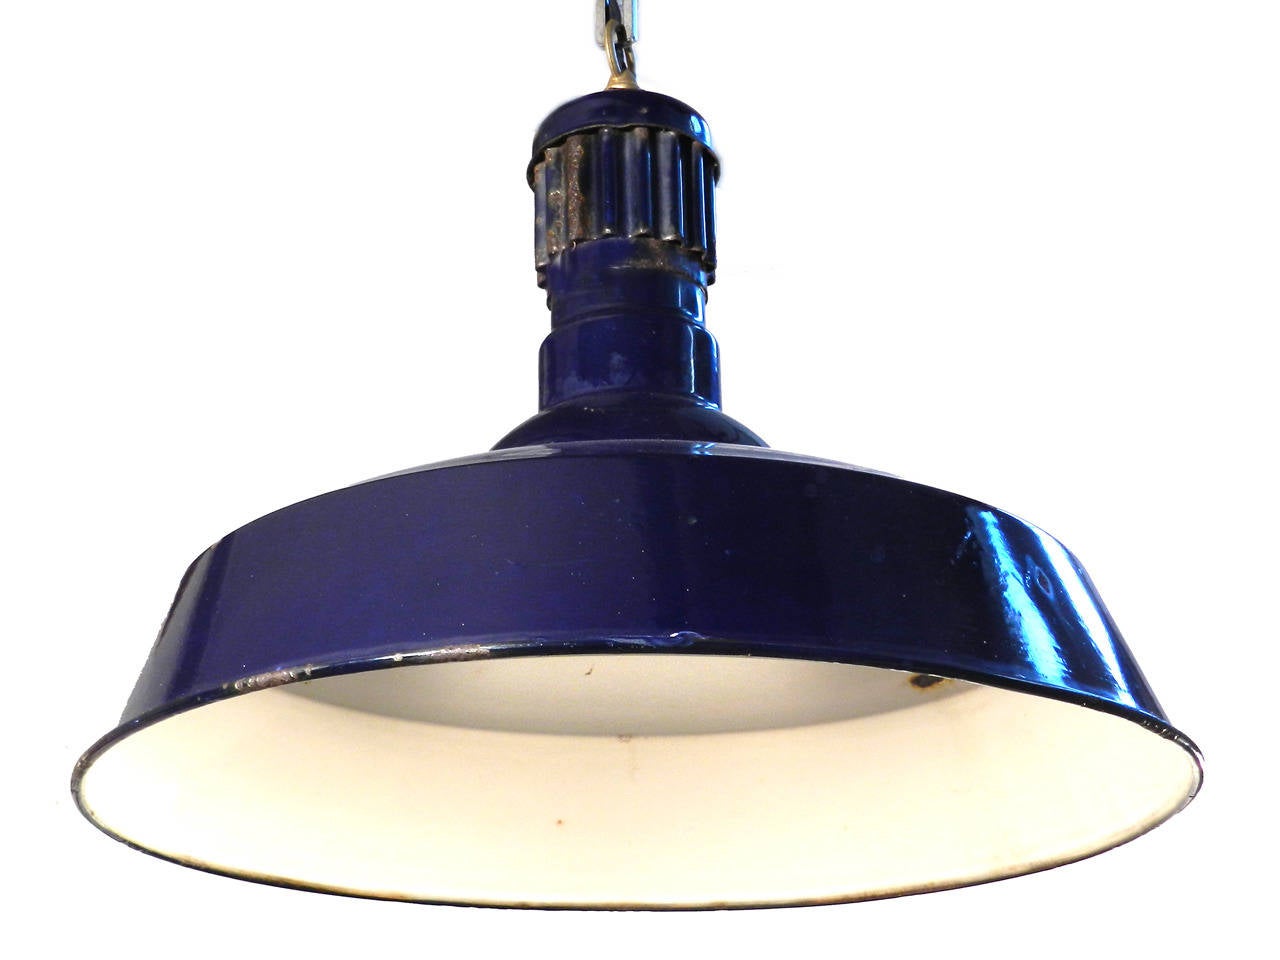 This is a good size pendant, it has a 20 inch diameter and is 16 inches tall. These blue porcelain fixtures are uncommon and a nice change from the typical white and green examples. It does show some surface rust in a few spots but saying it has an